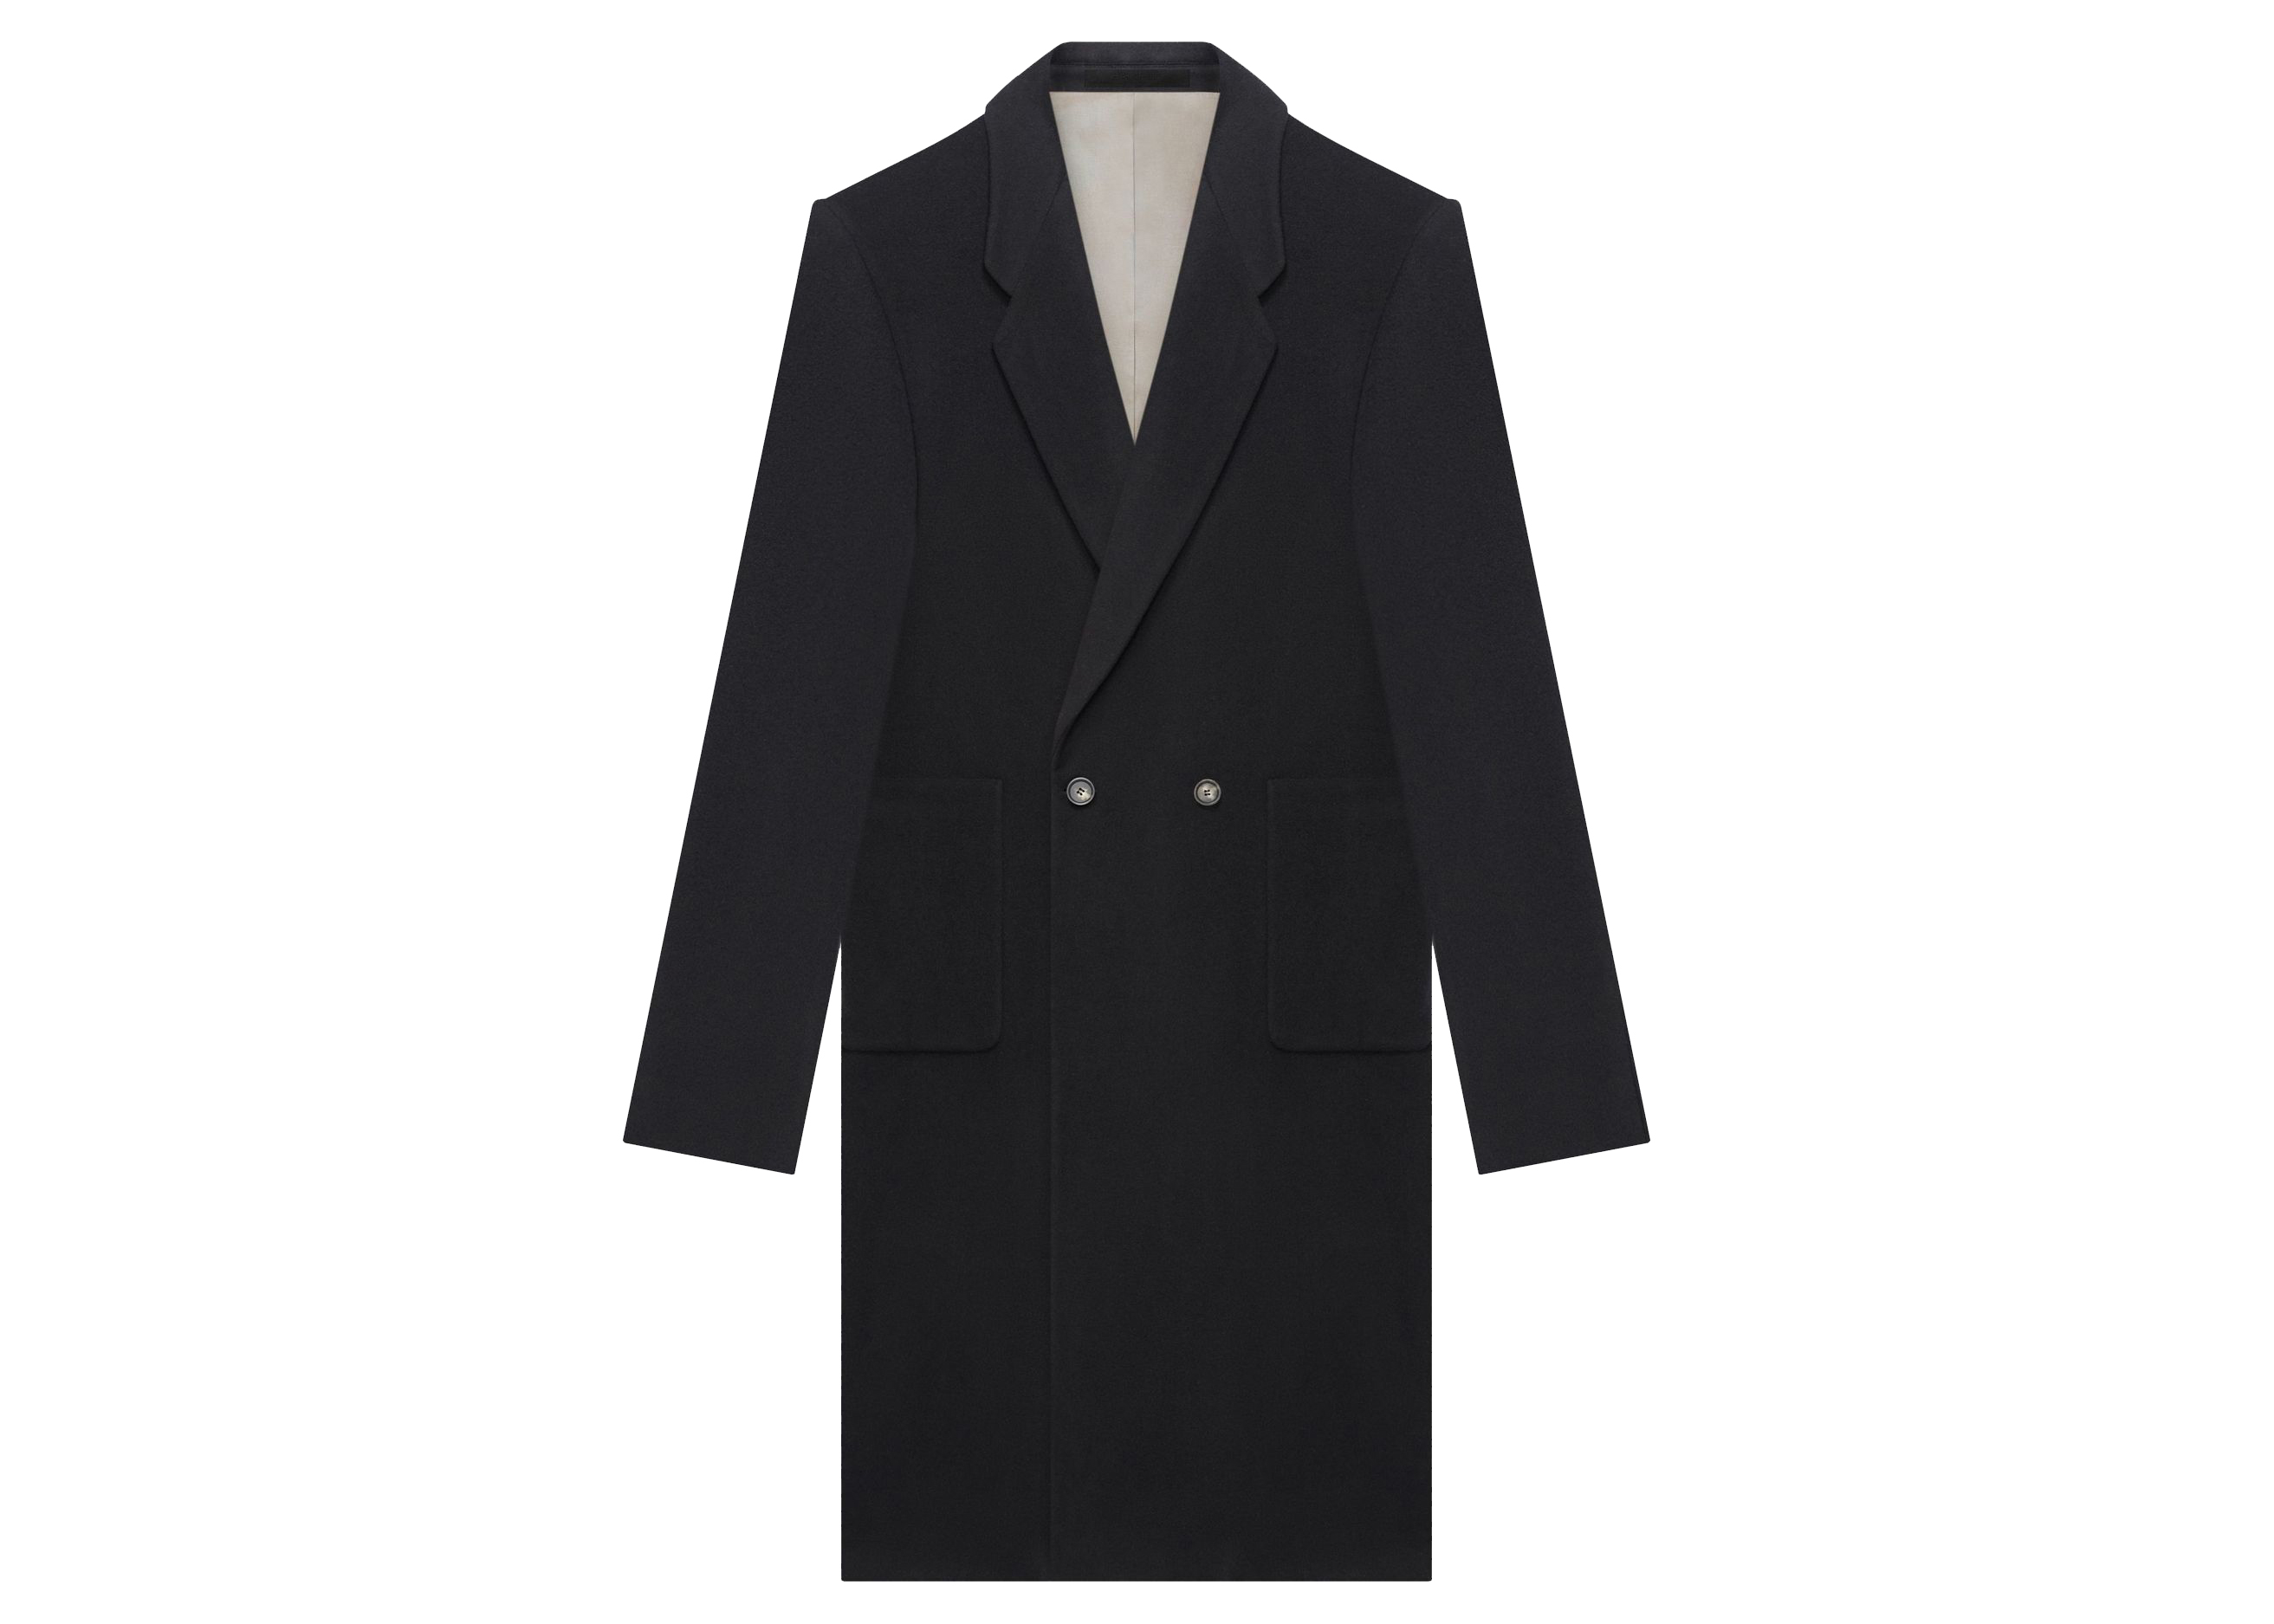 Fear of God Seventh Collection The Overcoat Black - SEVENTH 